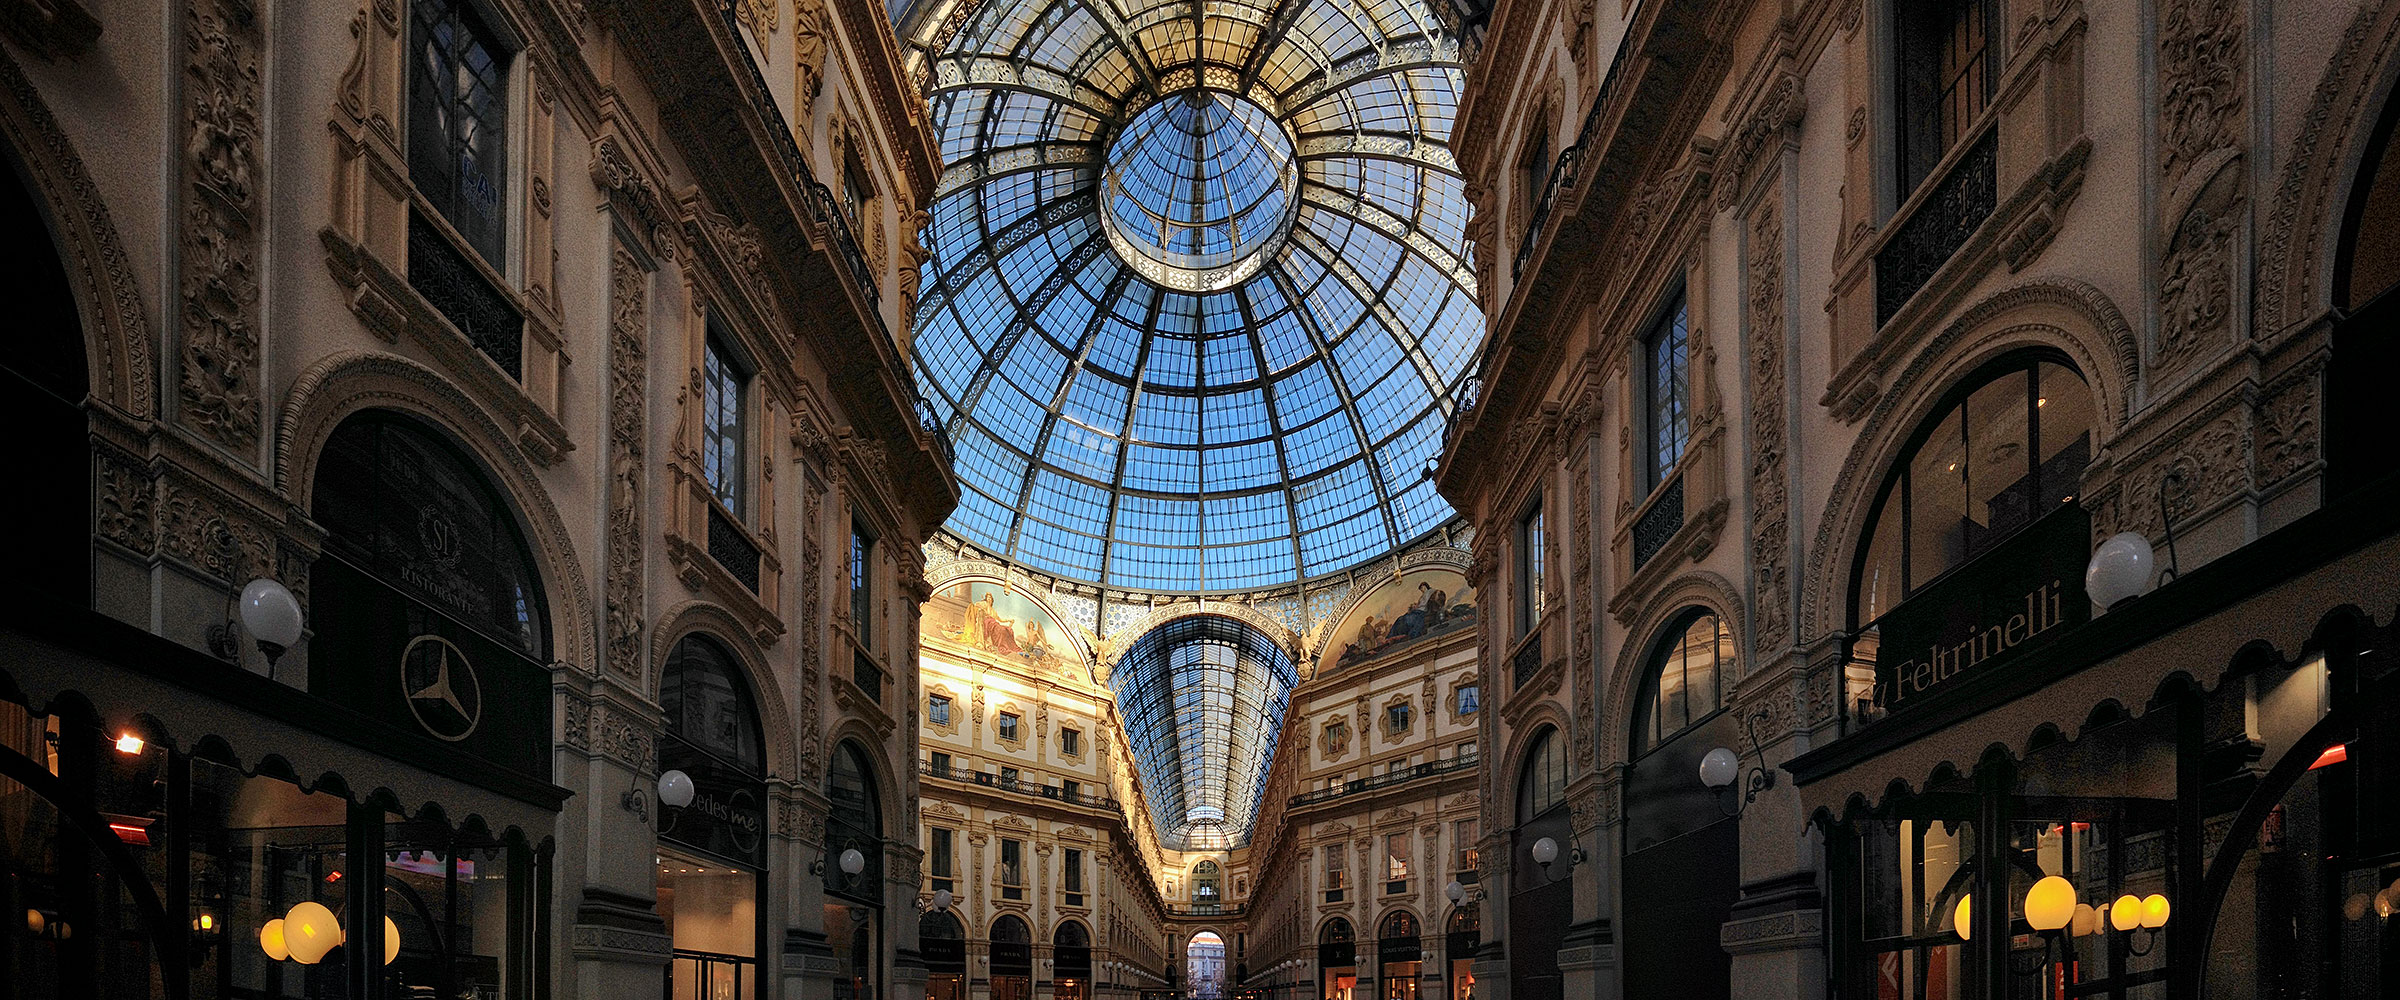 PANORAMA DIARY | Iphoneography blog | Milan, the Dome, Galleria Vittorio Emanuele II